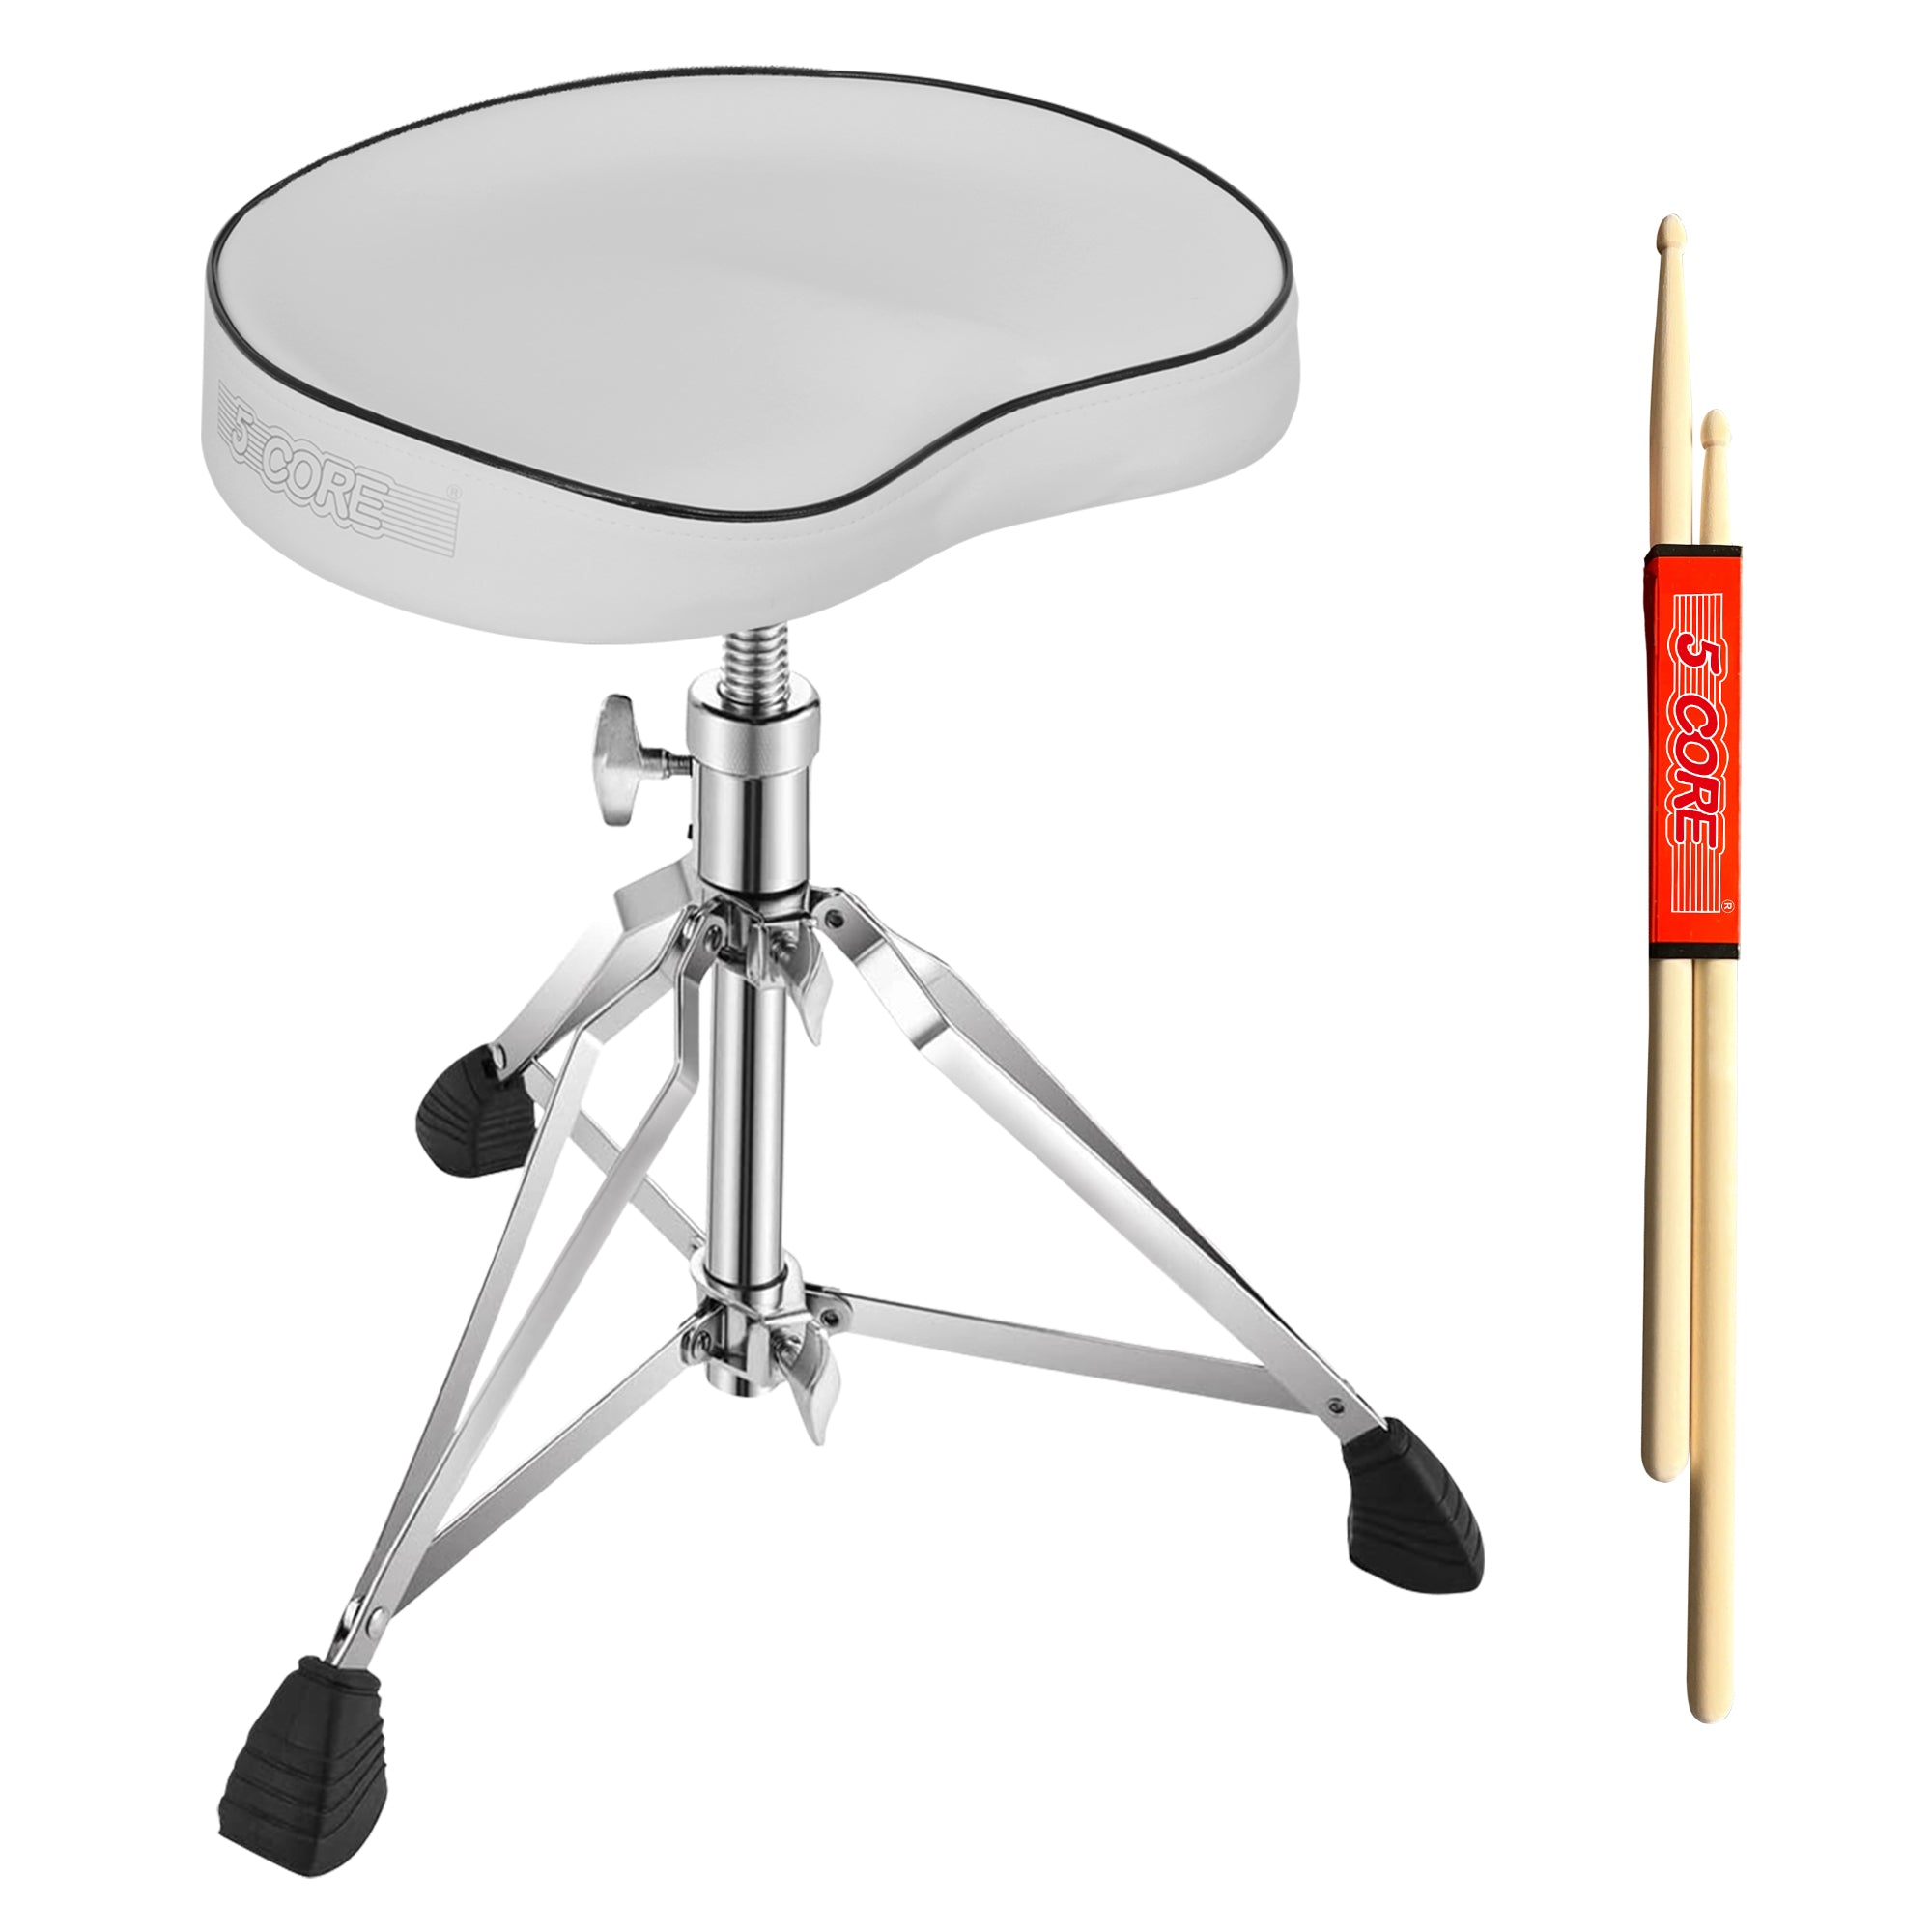 5 Core Drum Throne Saddle White| Heavy Duty Height Adjustable Padded Comfortable Drum Seat| Stools Chair  Style with Double Braced Anti-Slip Feet and Two Drumsticks for Adults Drummers- DS CH WH SDL HD